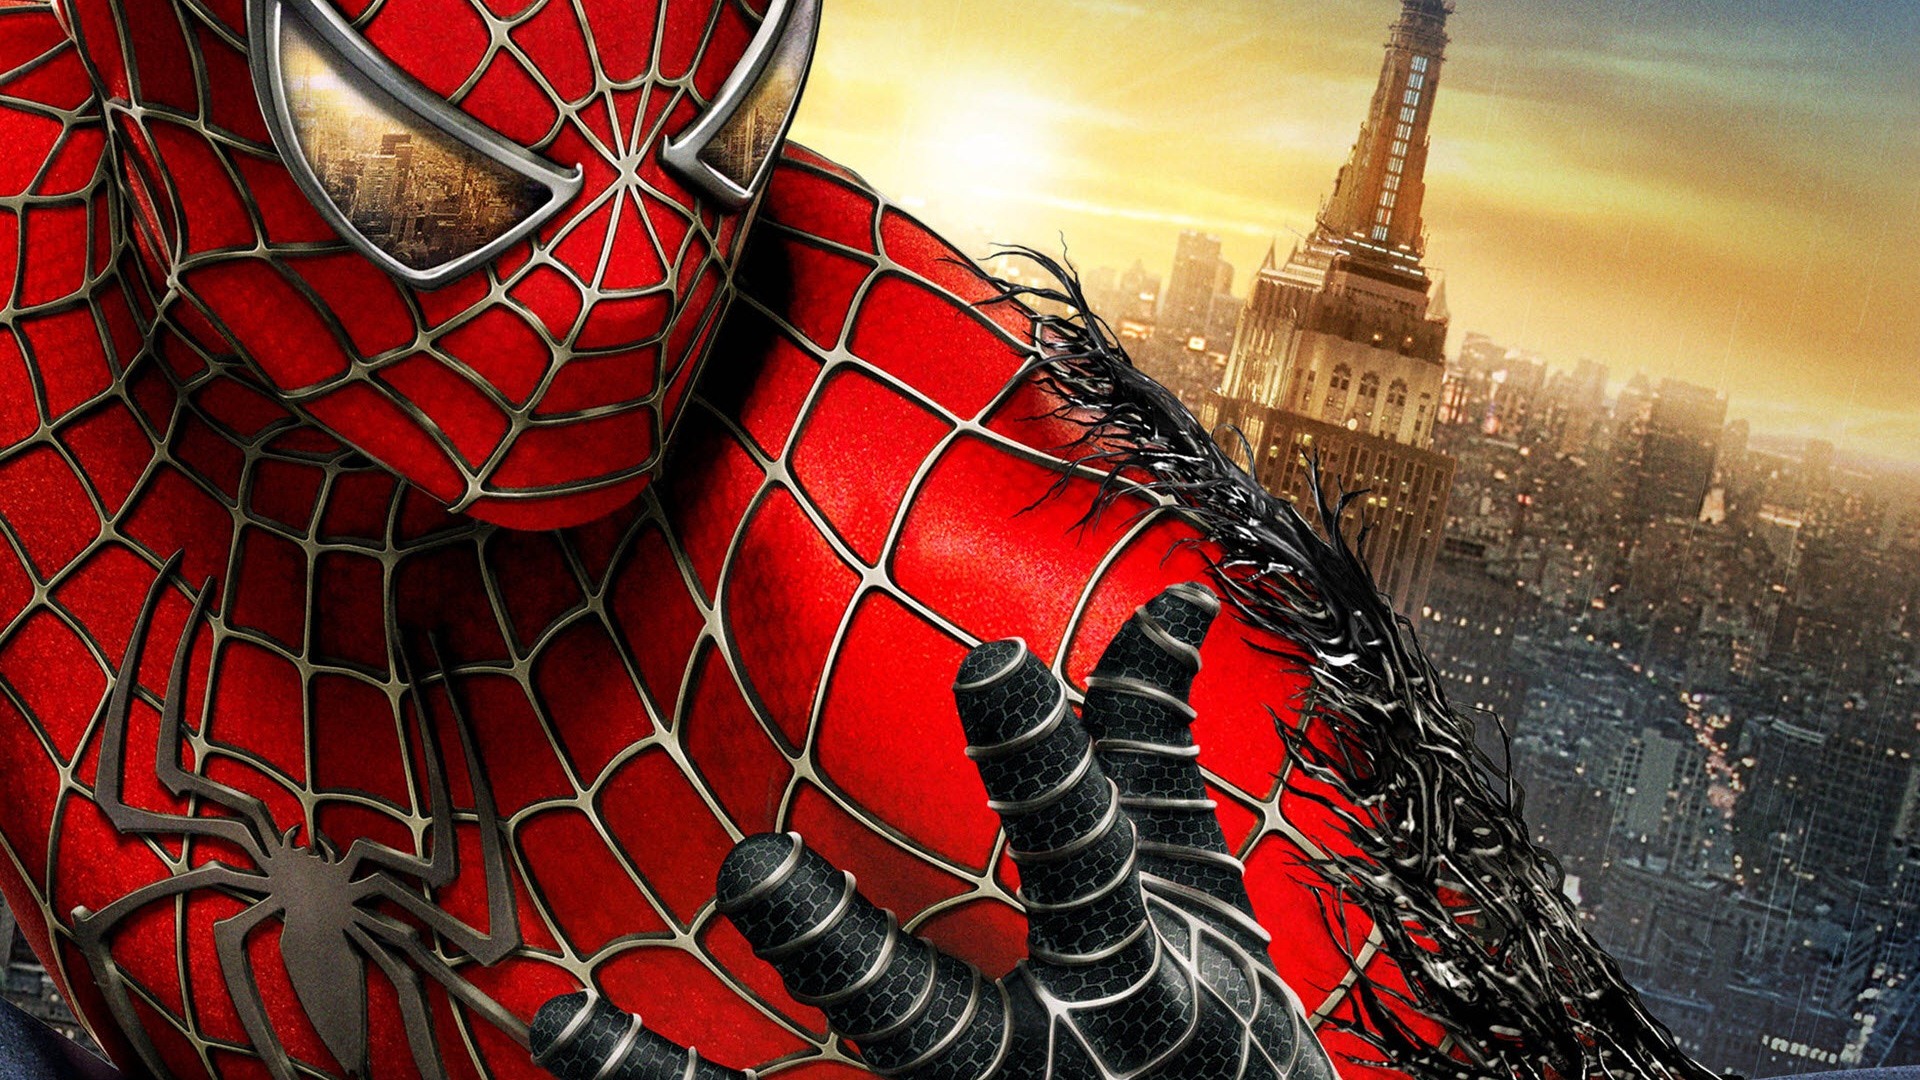 1920x1080 The Amazing Spiderman Browser Themes & Desktop Image